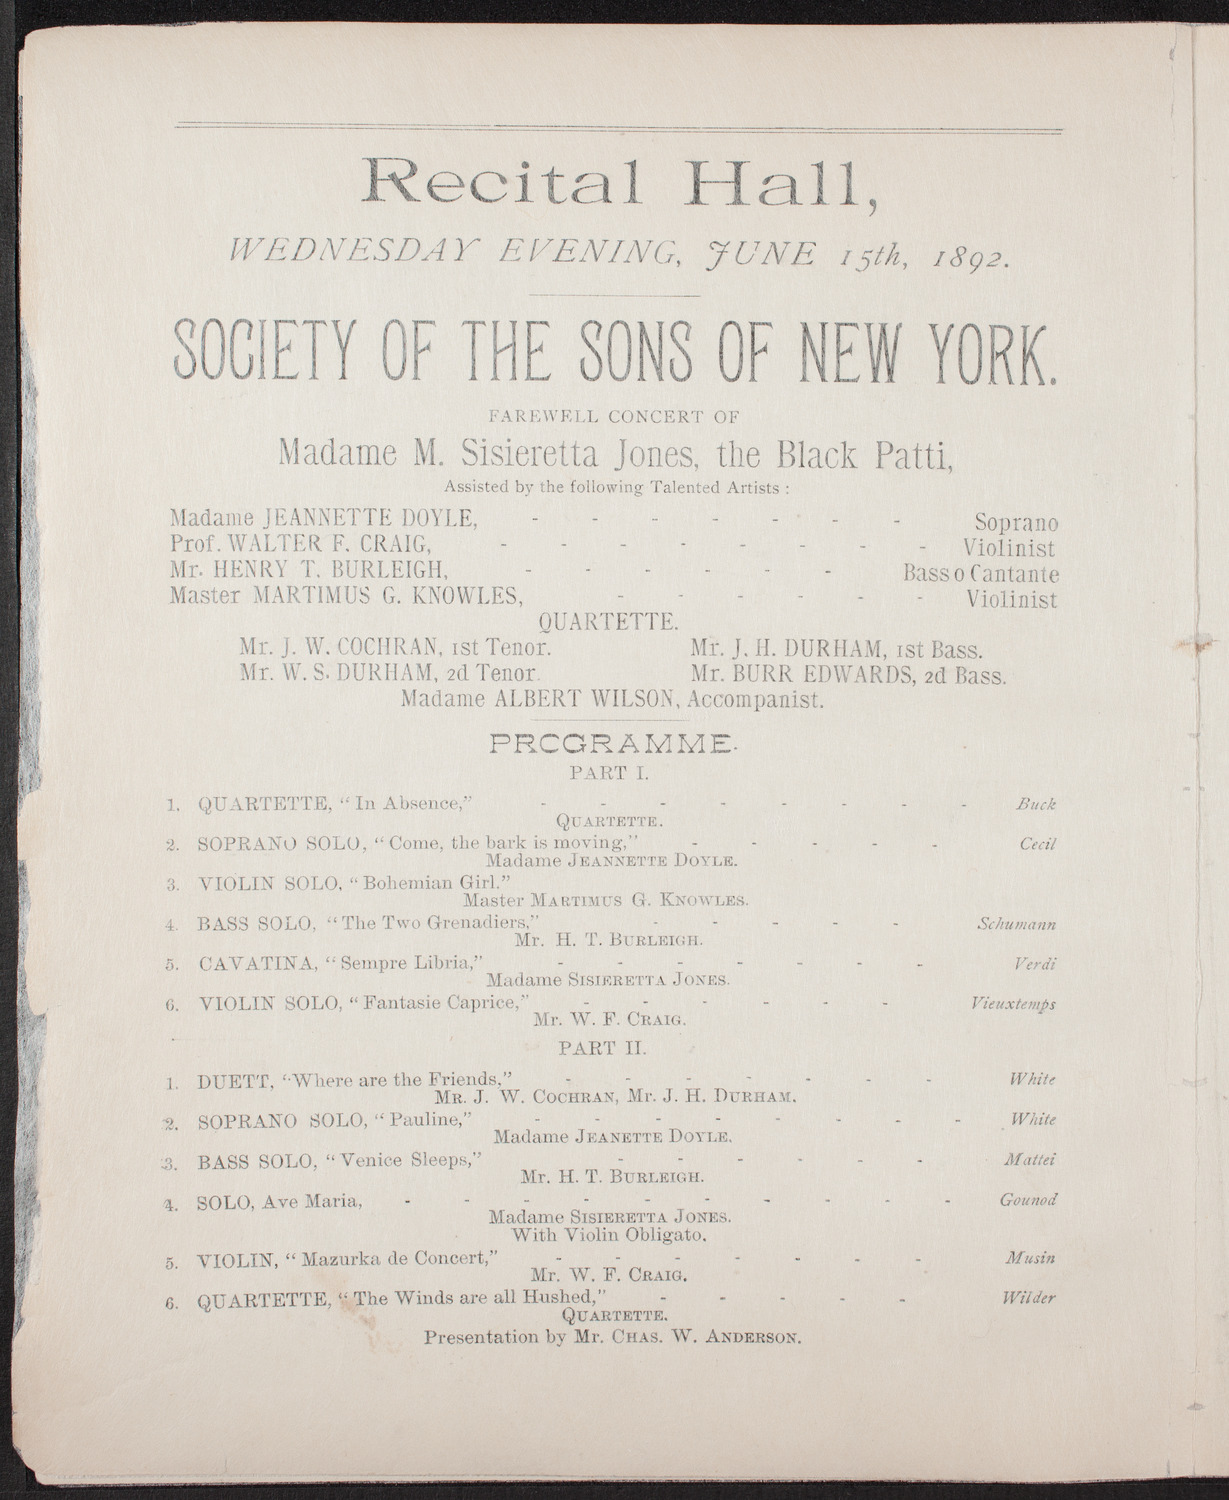 Society of the Sons of New York: Farewell Concert of Sisieretta Jones, the Black Patti, June 15, 1892, program page 3